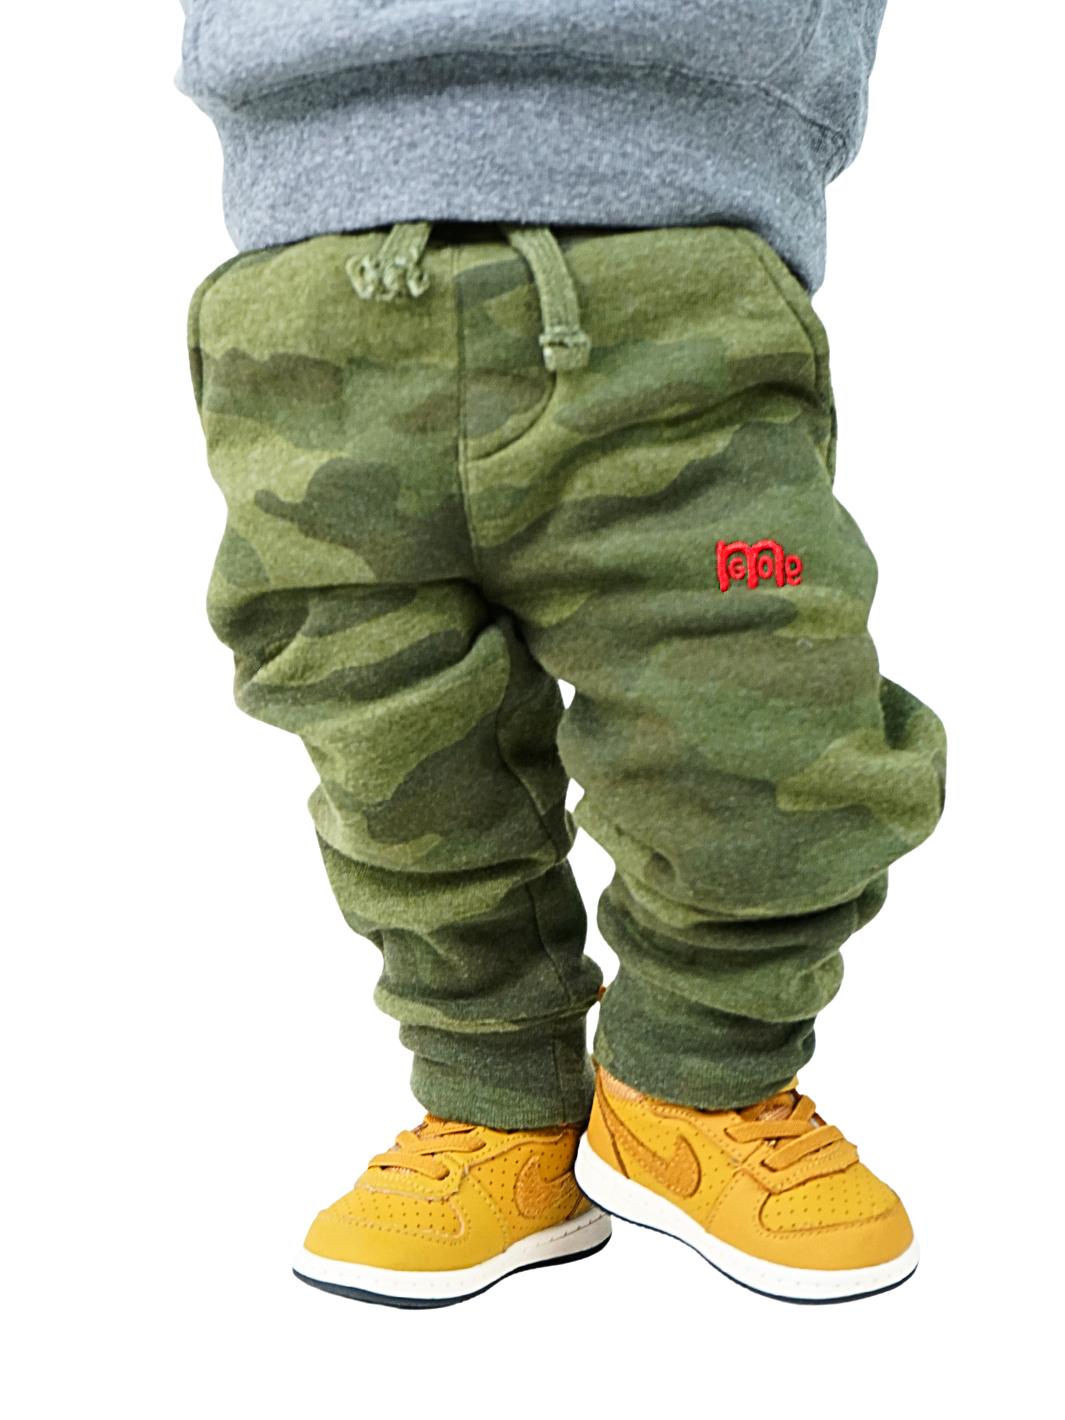 Toddler size Camouflage jogger Sweatpants with elastic waistband, sewn fly detail, jersey-lined front pockets, stylish back pocket, and Red GODinme logo.